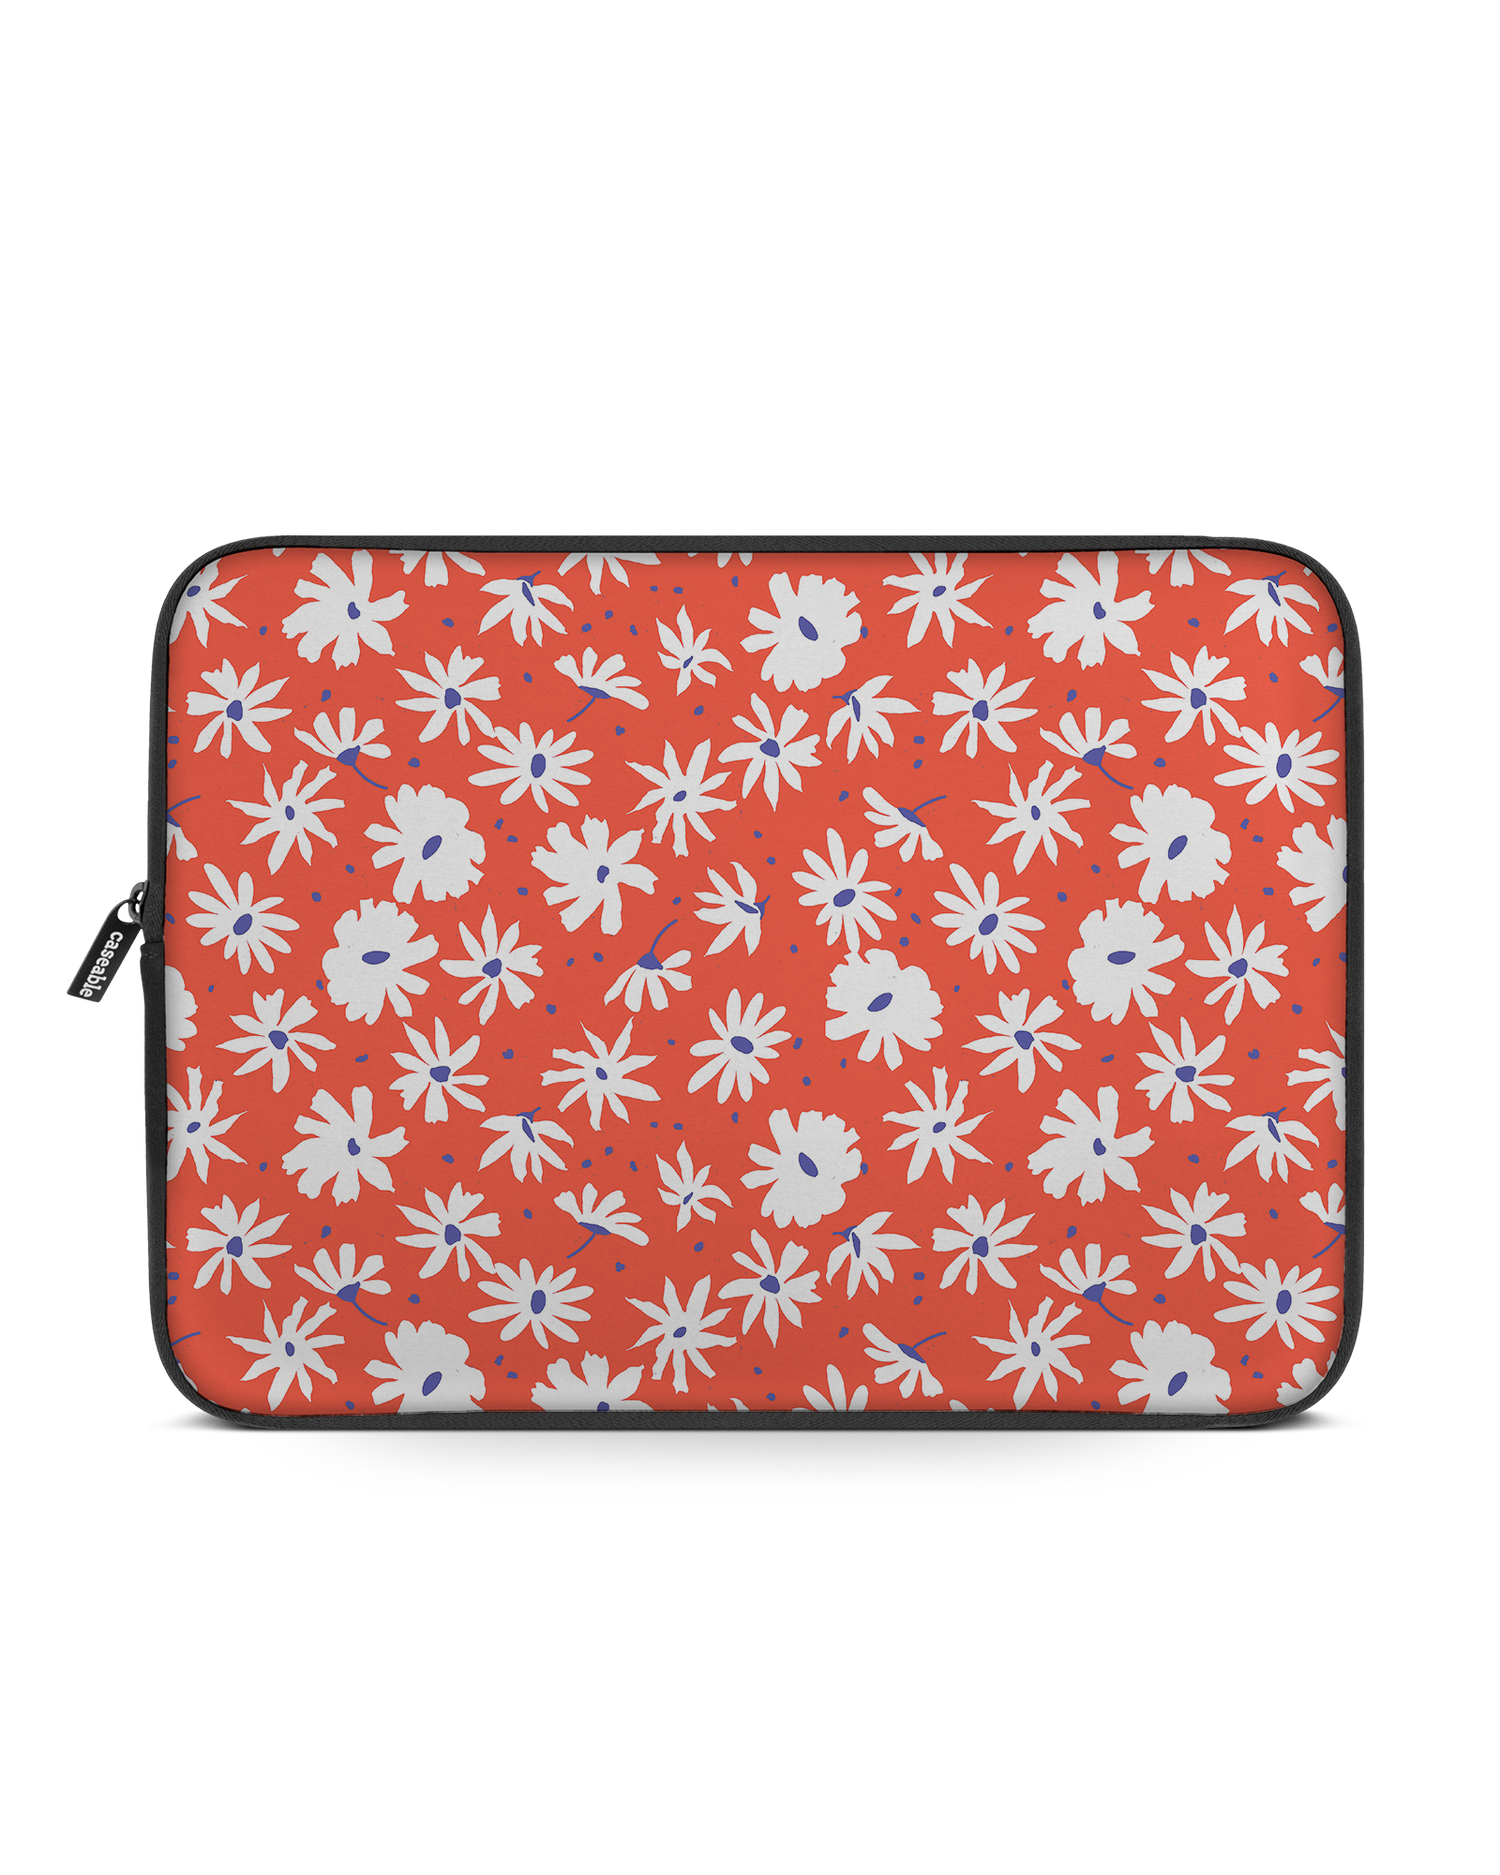 Retro Daisy Laptop Case 15 inch: Front View